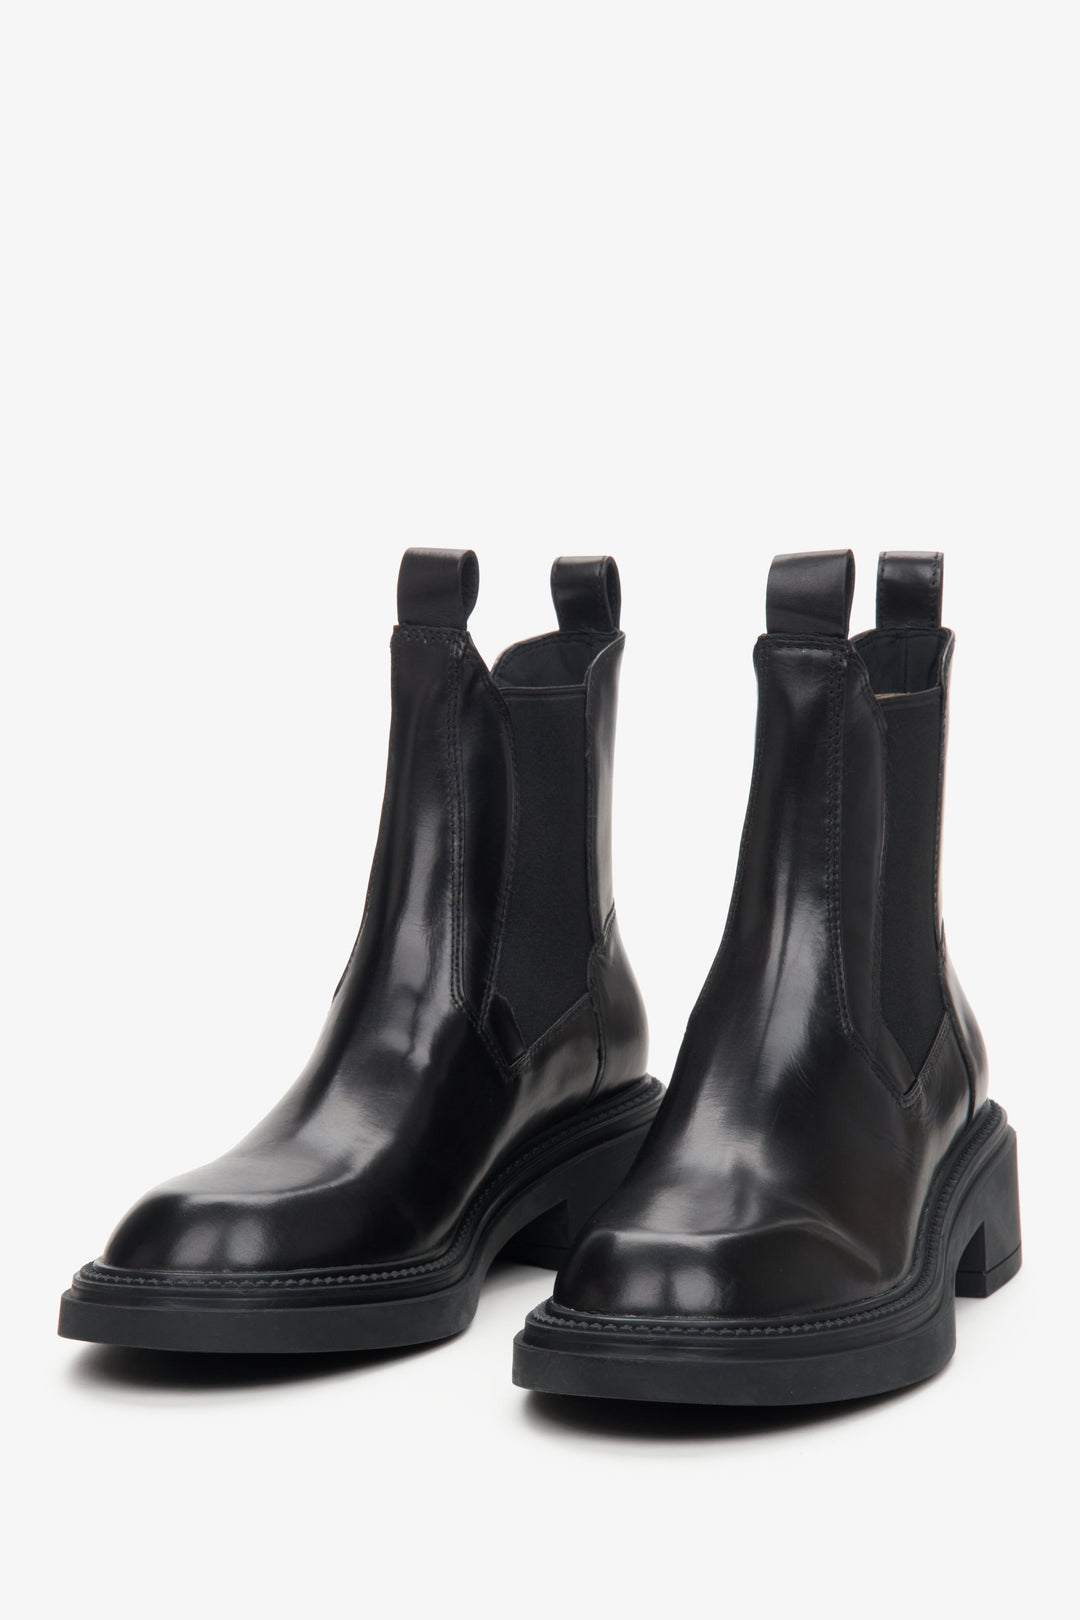 Comfy women's black leather Chelsea boots.